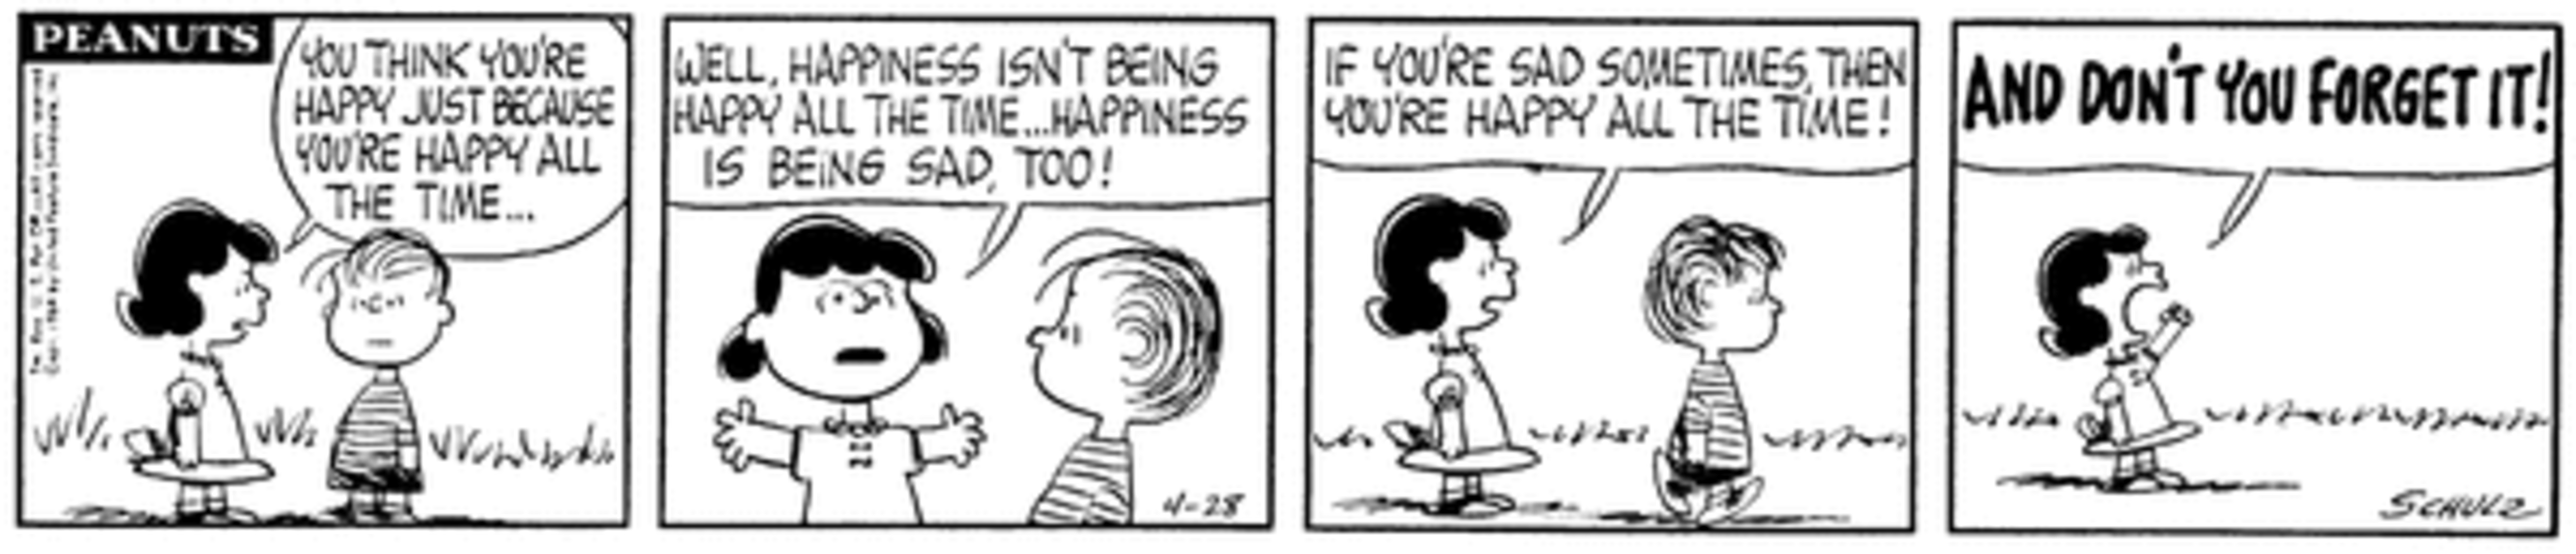 Lucy and Linus in the Peanuts.